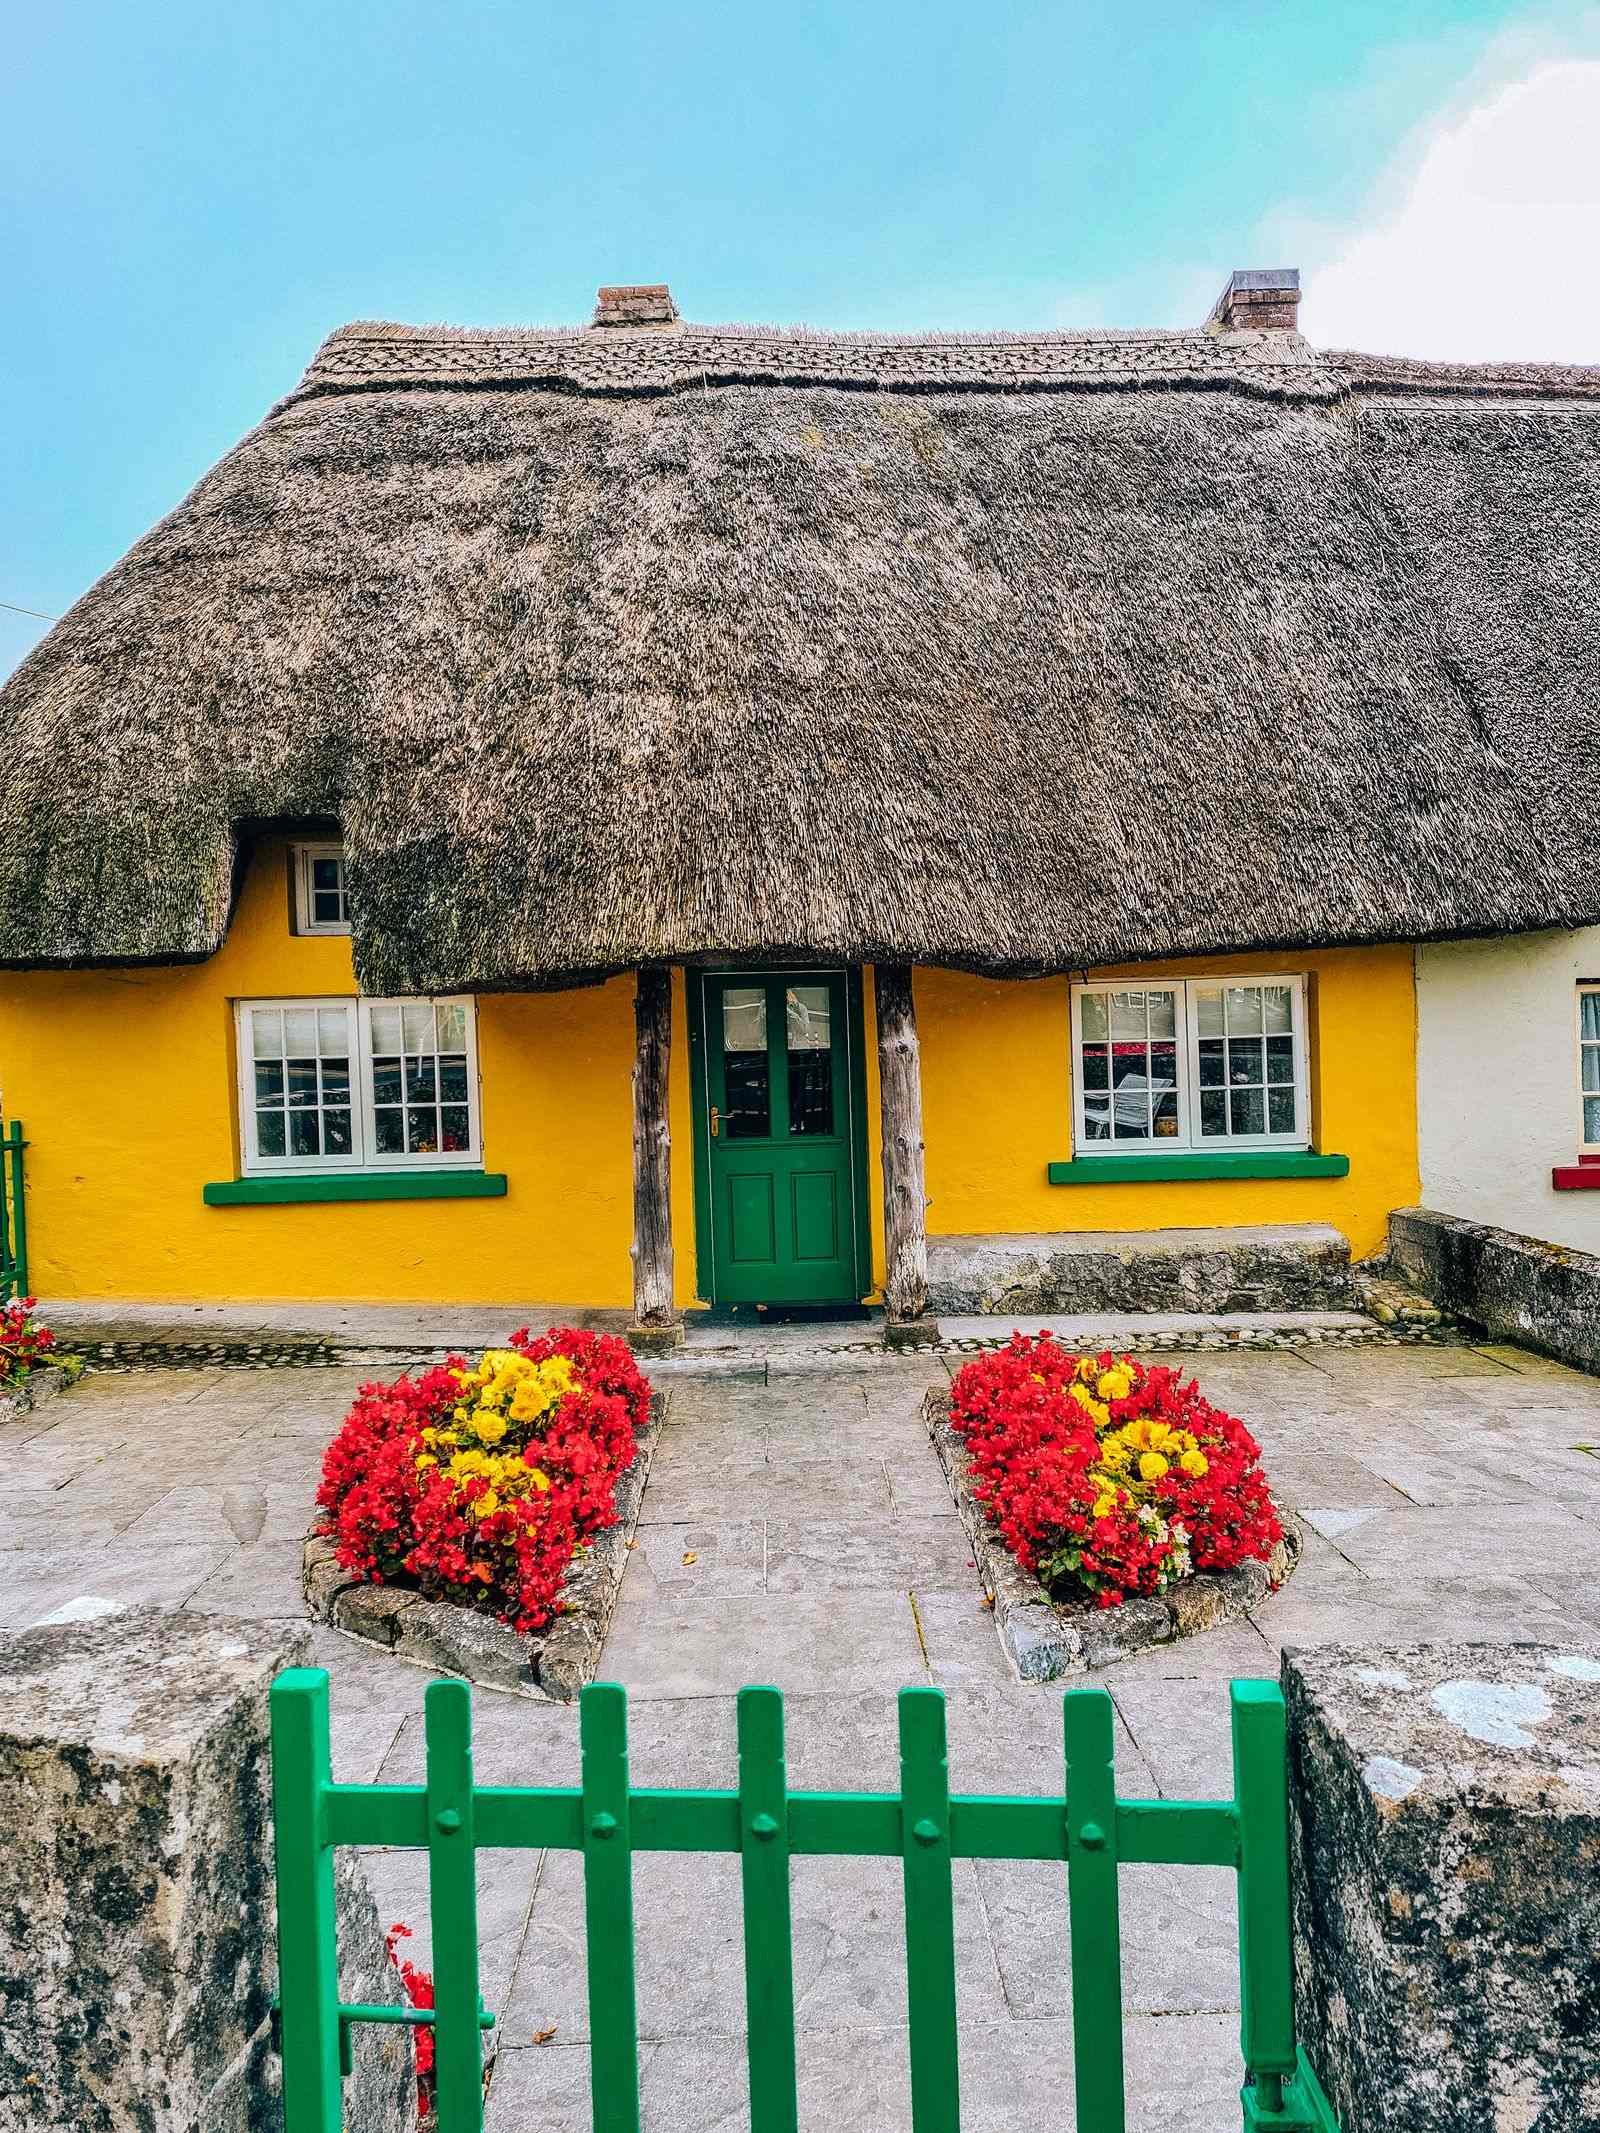 Yellow house in Adare